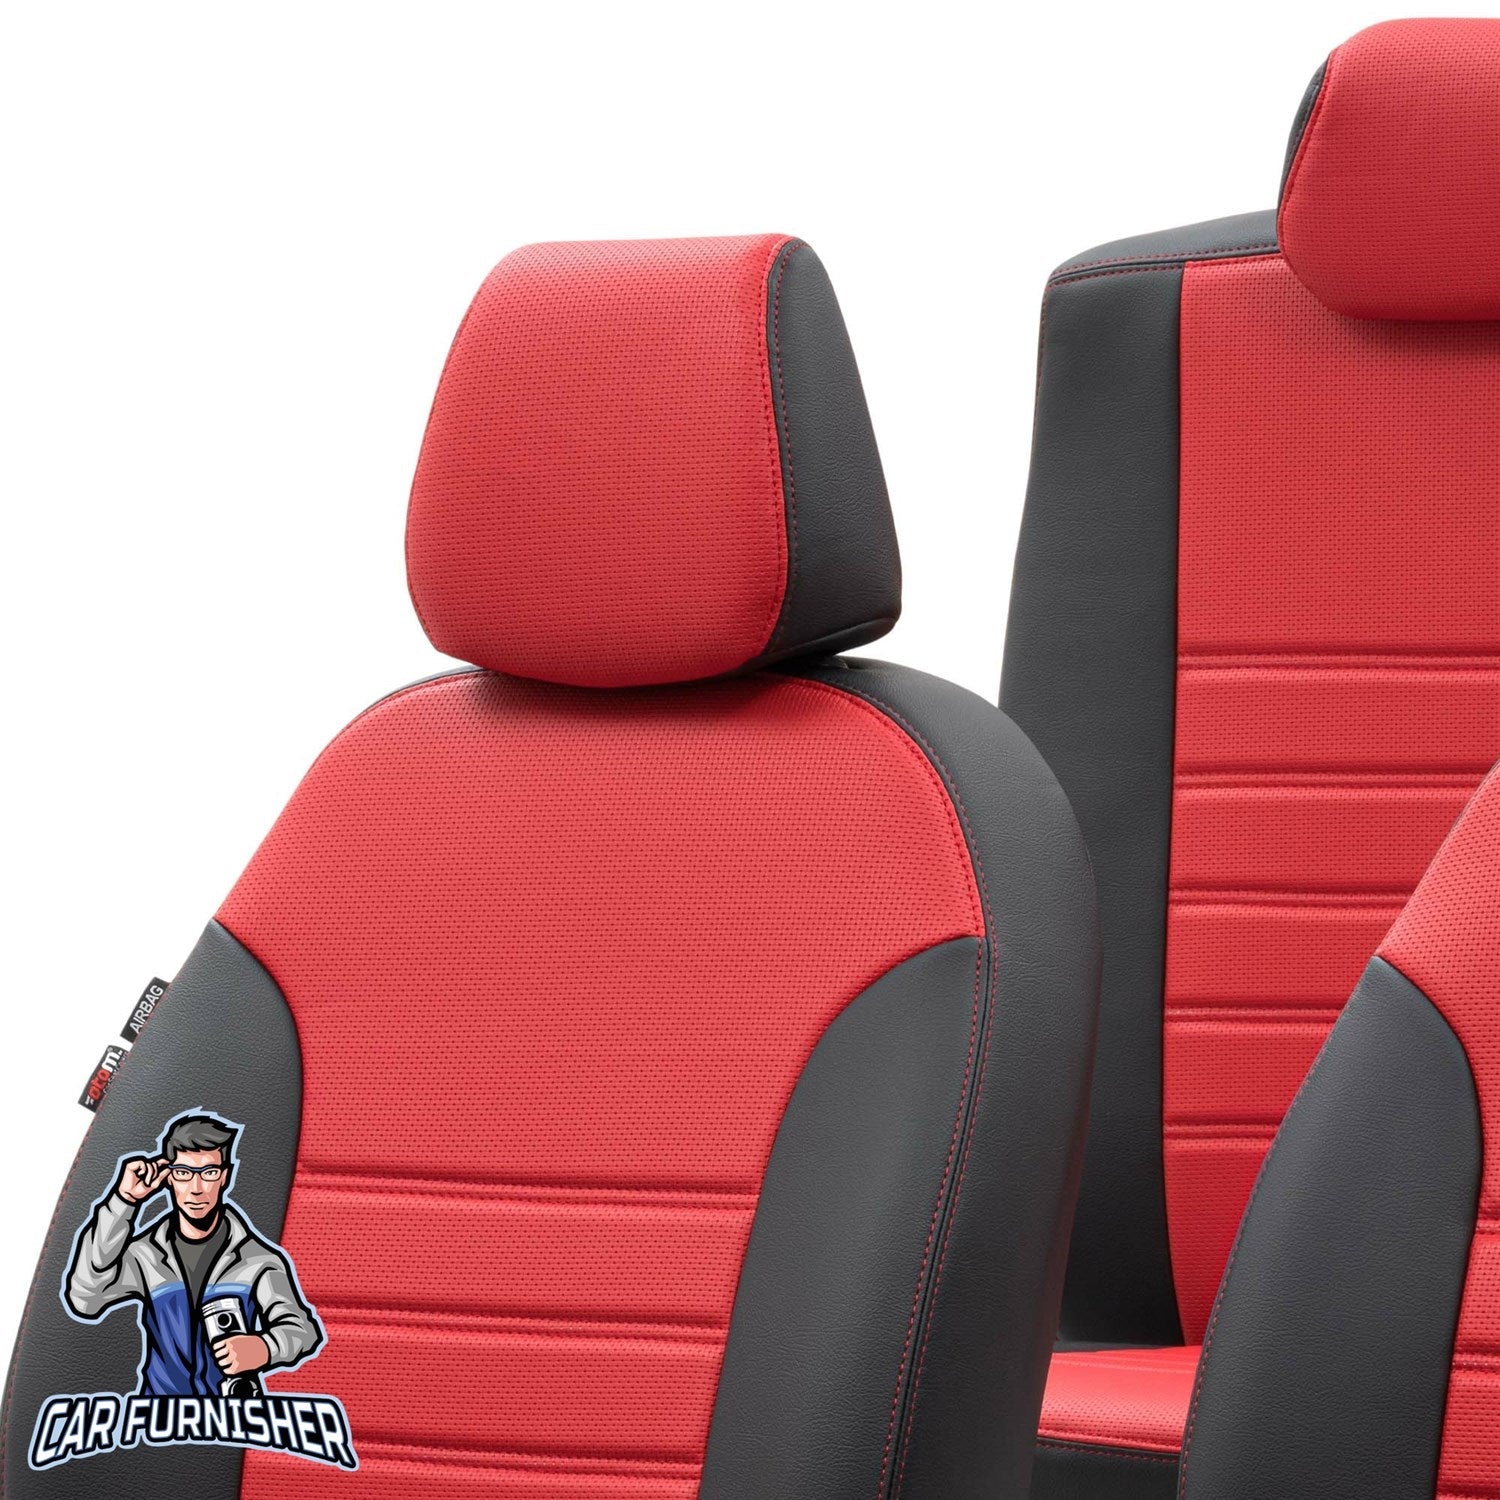 Volkswagen Transporter Seat Cover New York Leather Design Red Leather